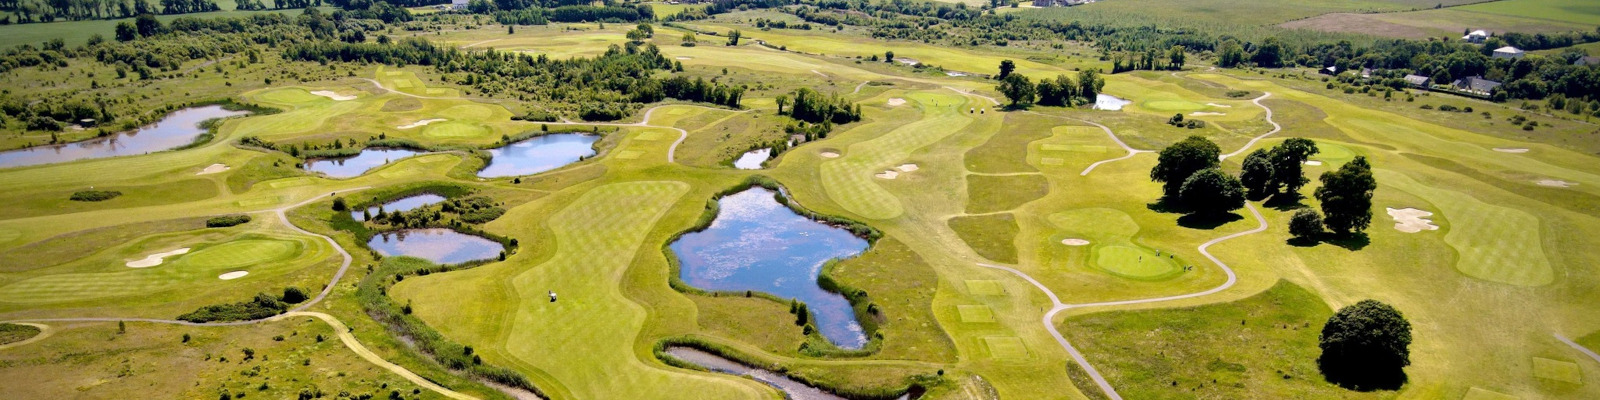 Moyvalley GC (Photo by Moyvalley GC)